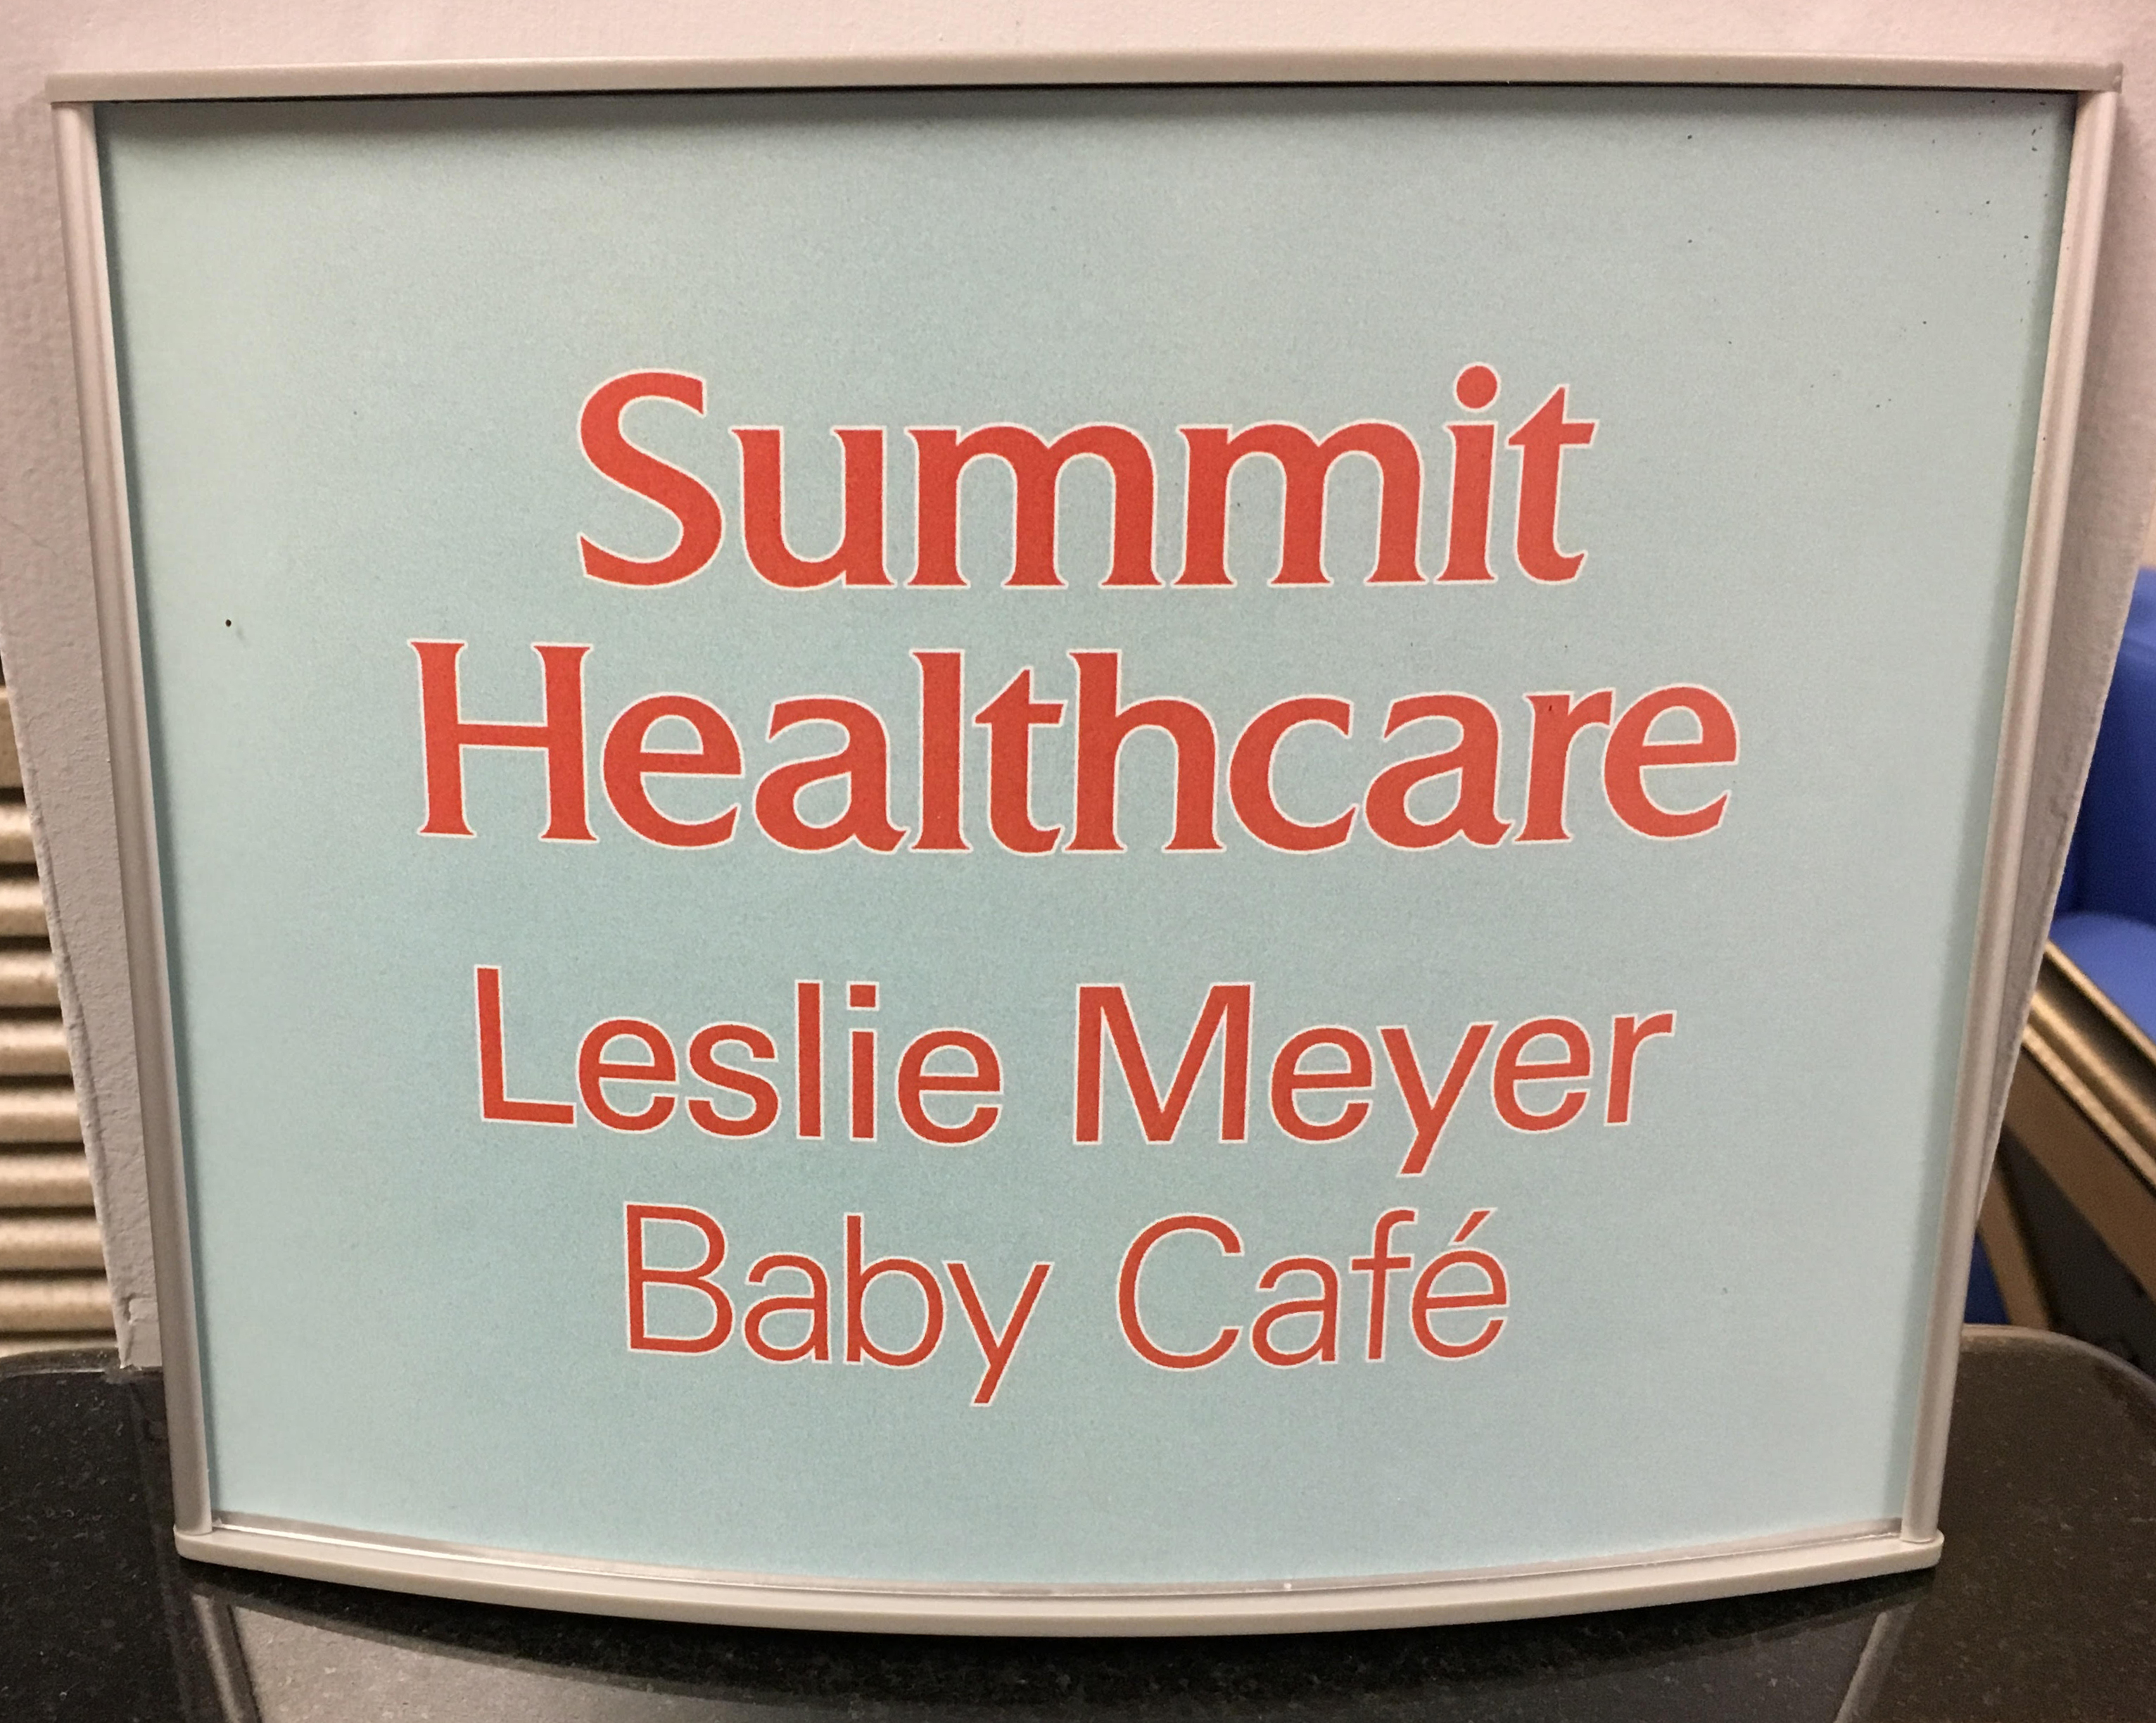 Leslie Meyer's name on the baby cafe sign